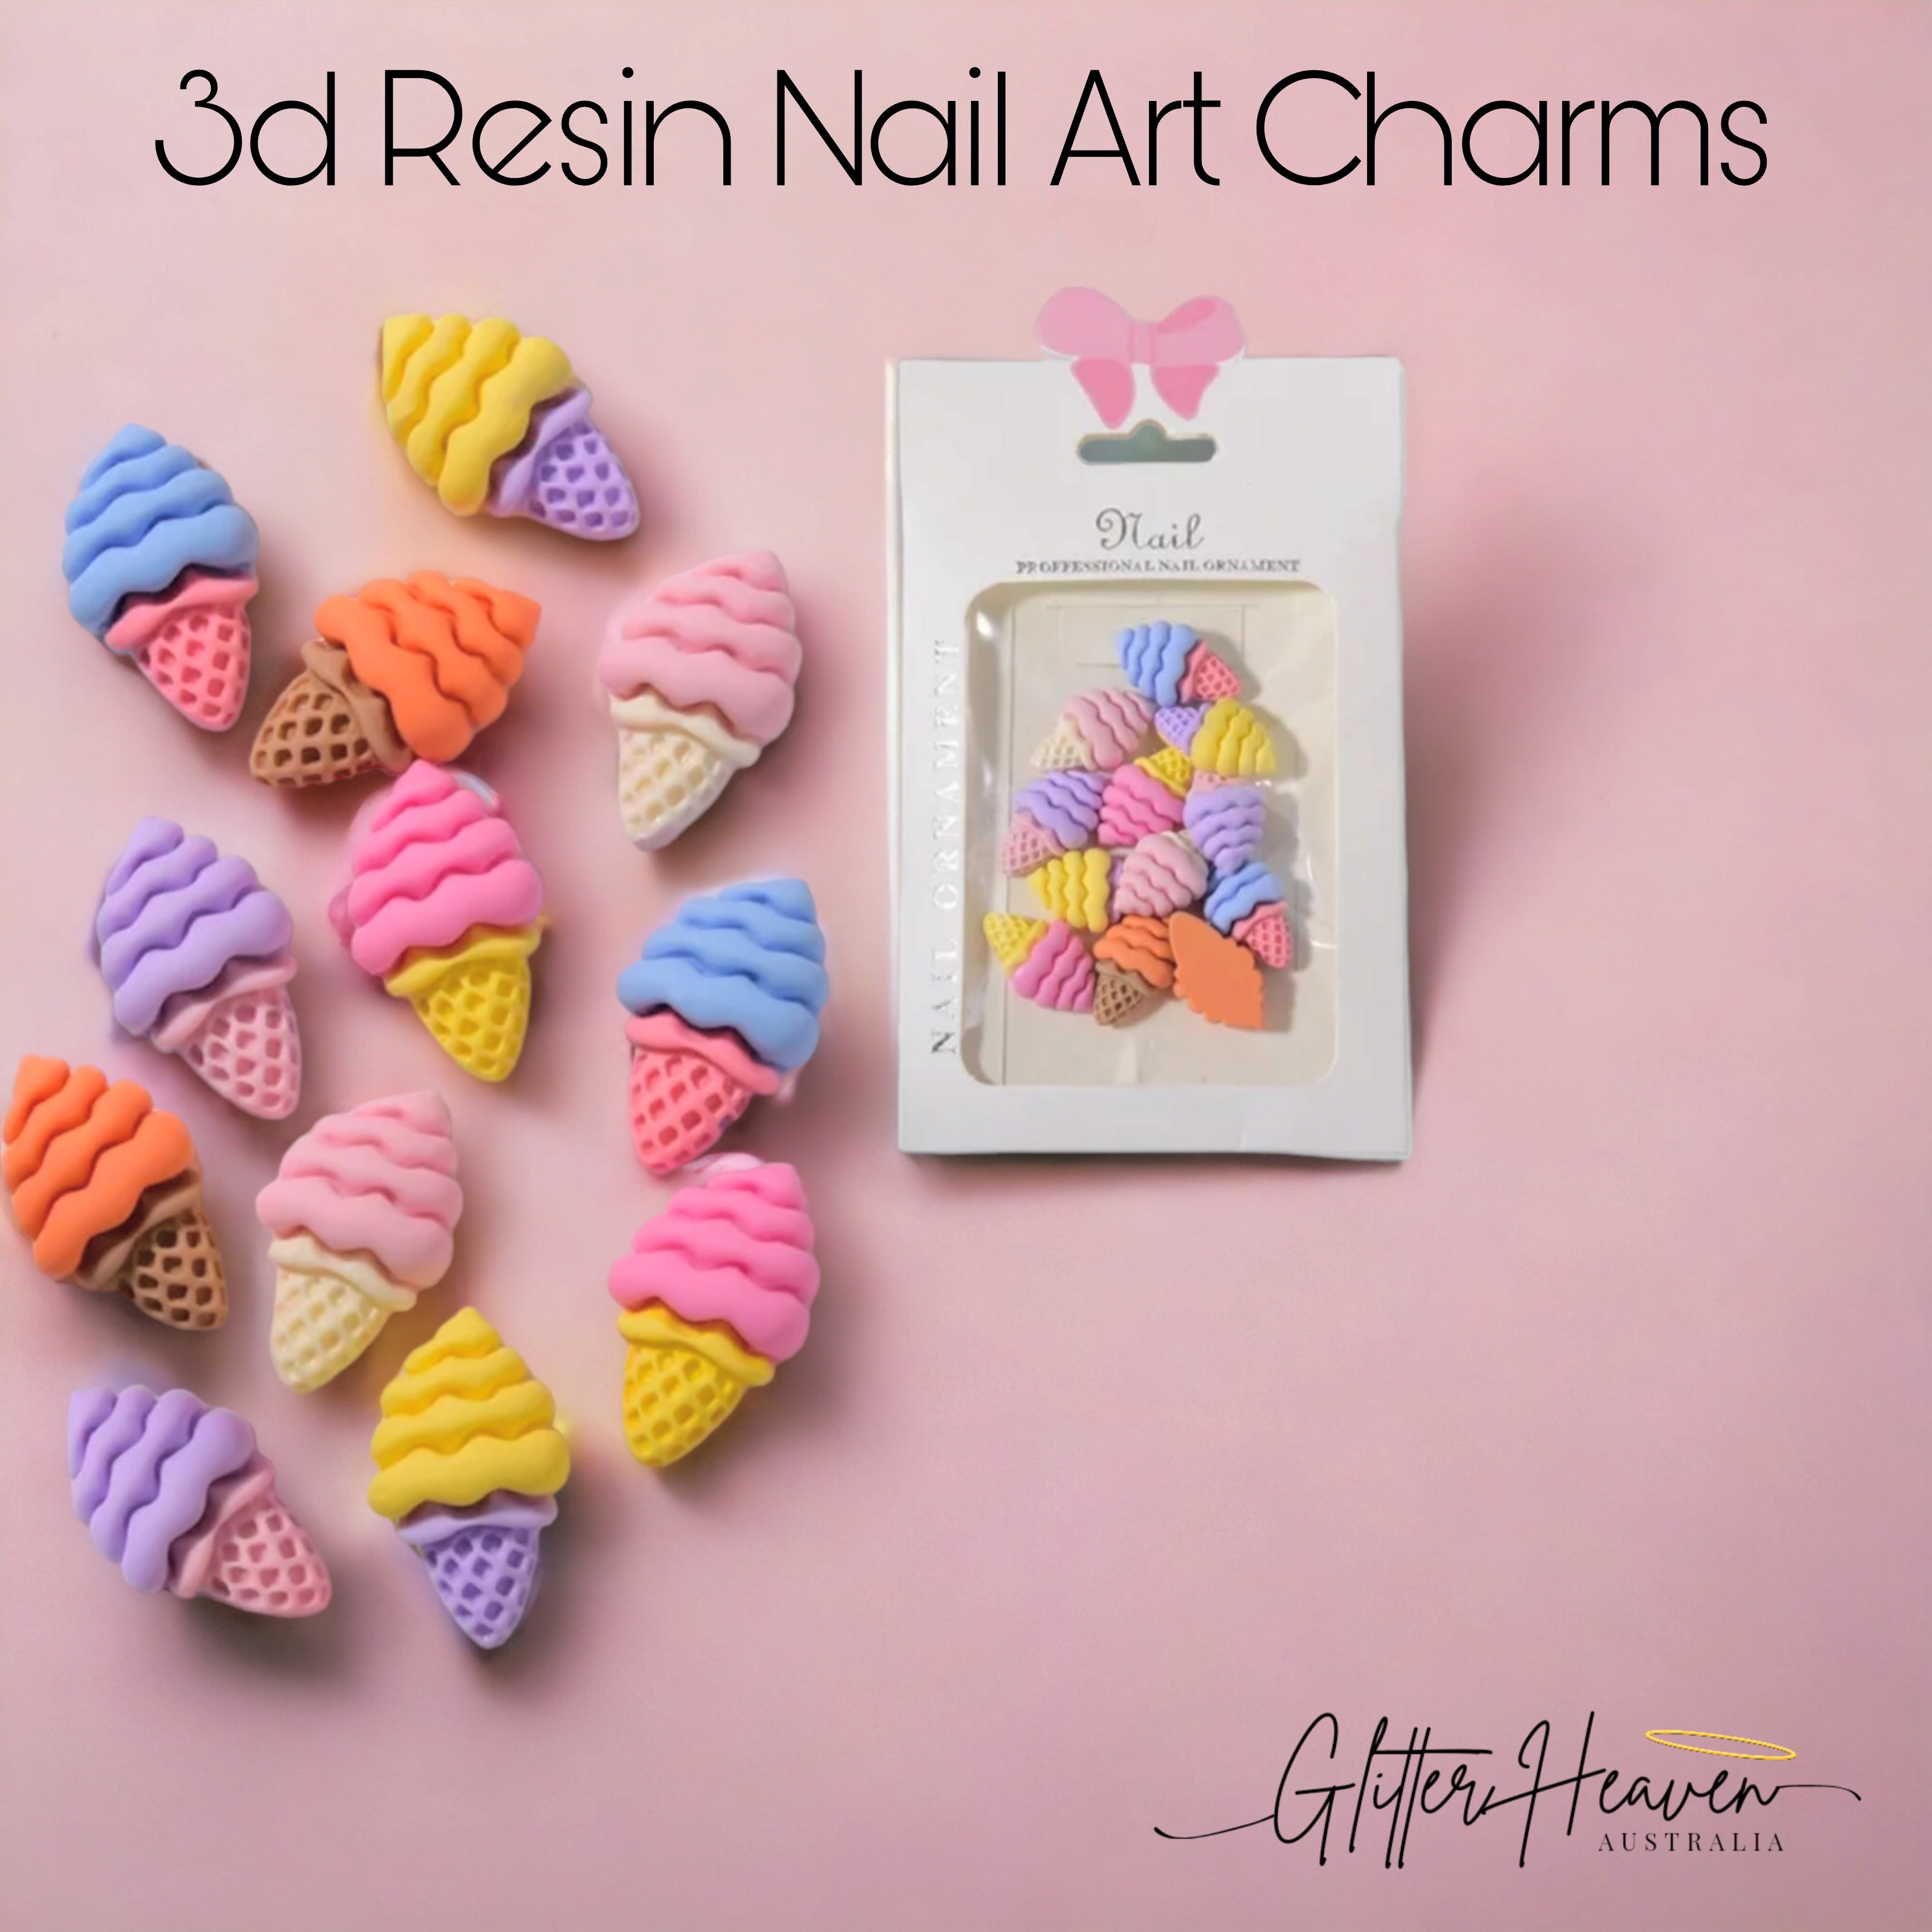 Ice Cream 3d Resin Charms For Nails!